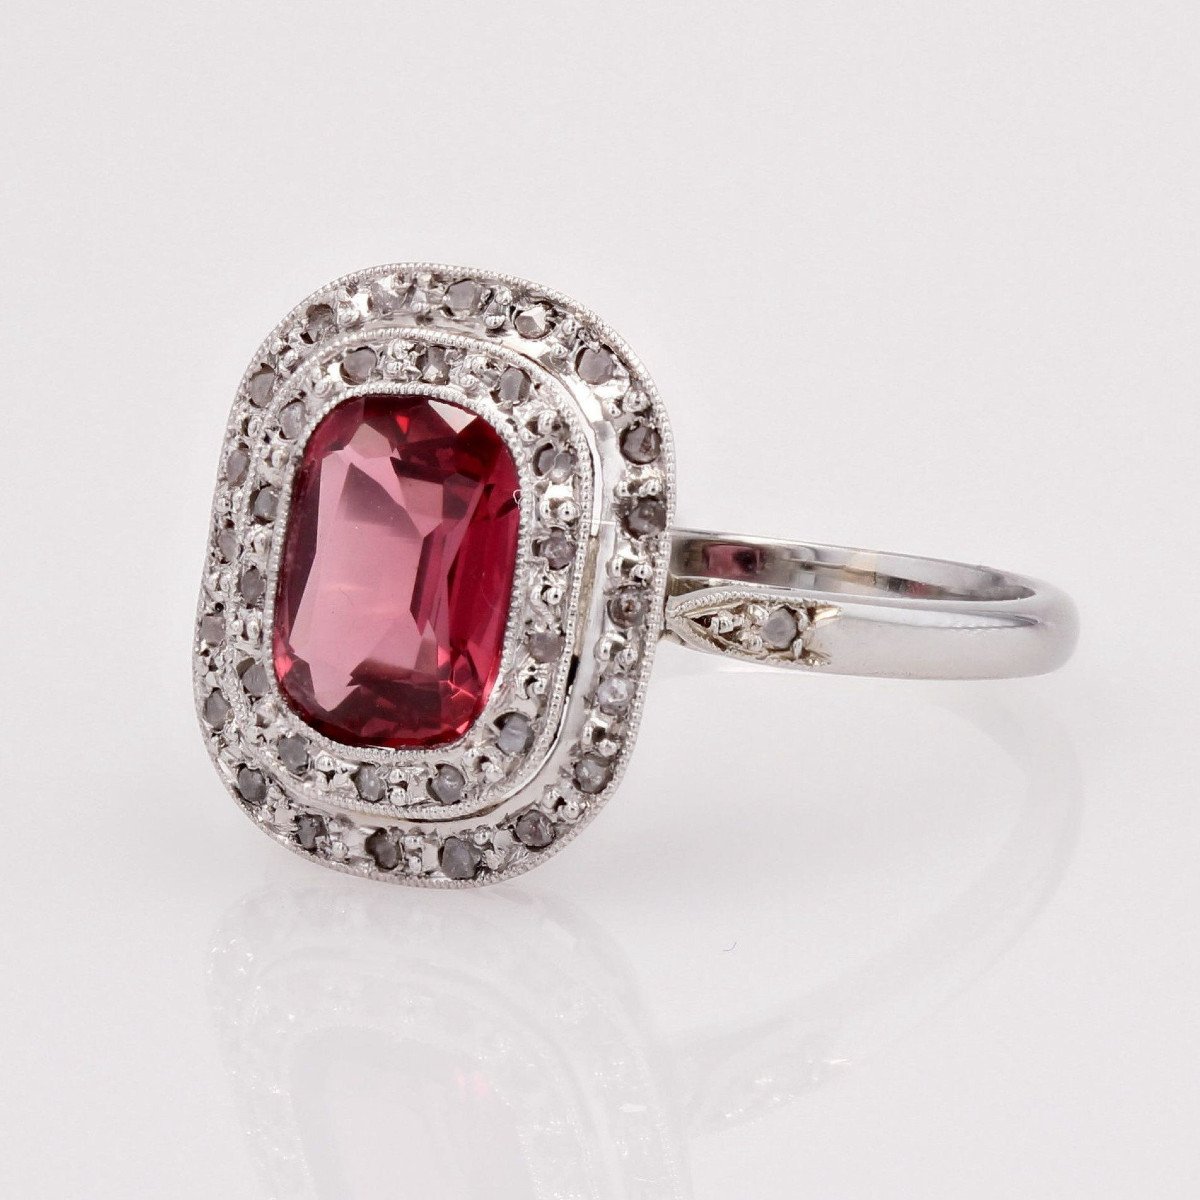 Antique Red Spinel And Diamonds Ring-photo-3